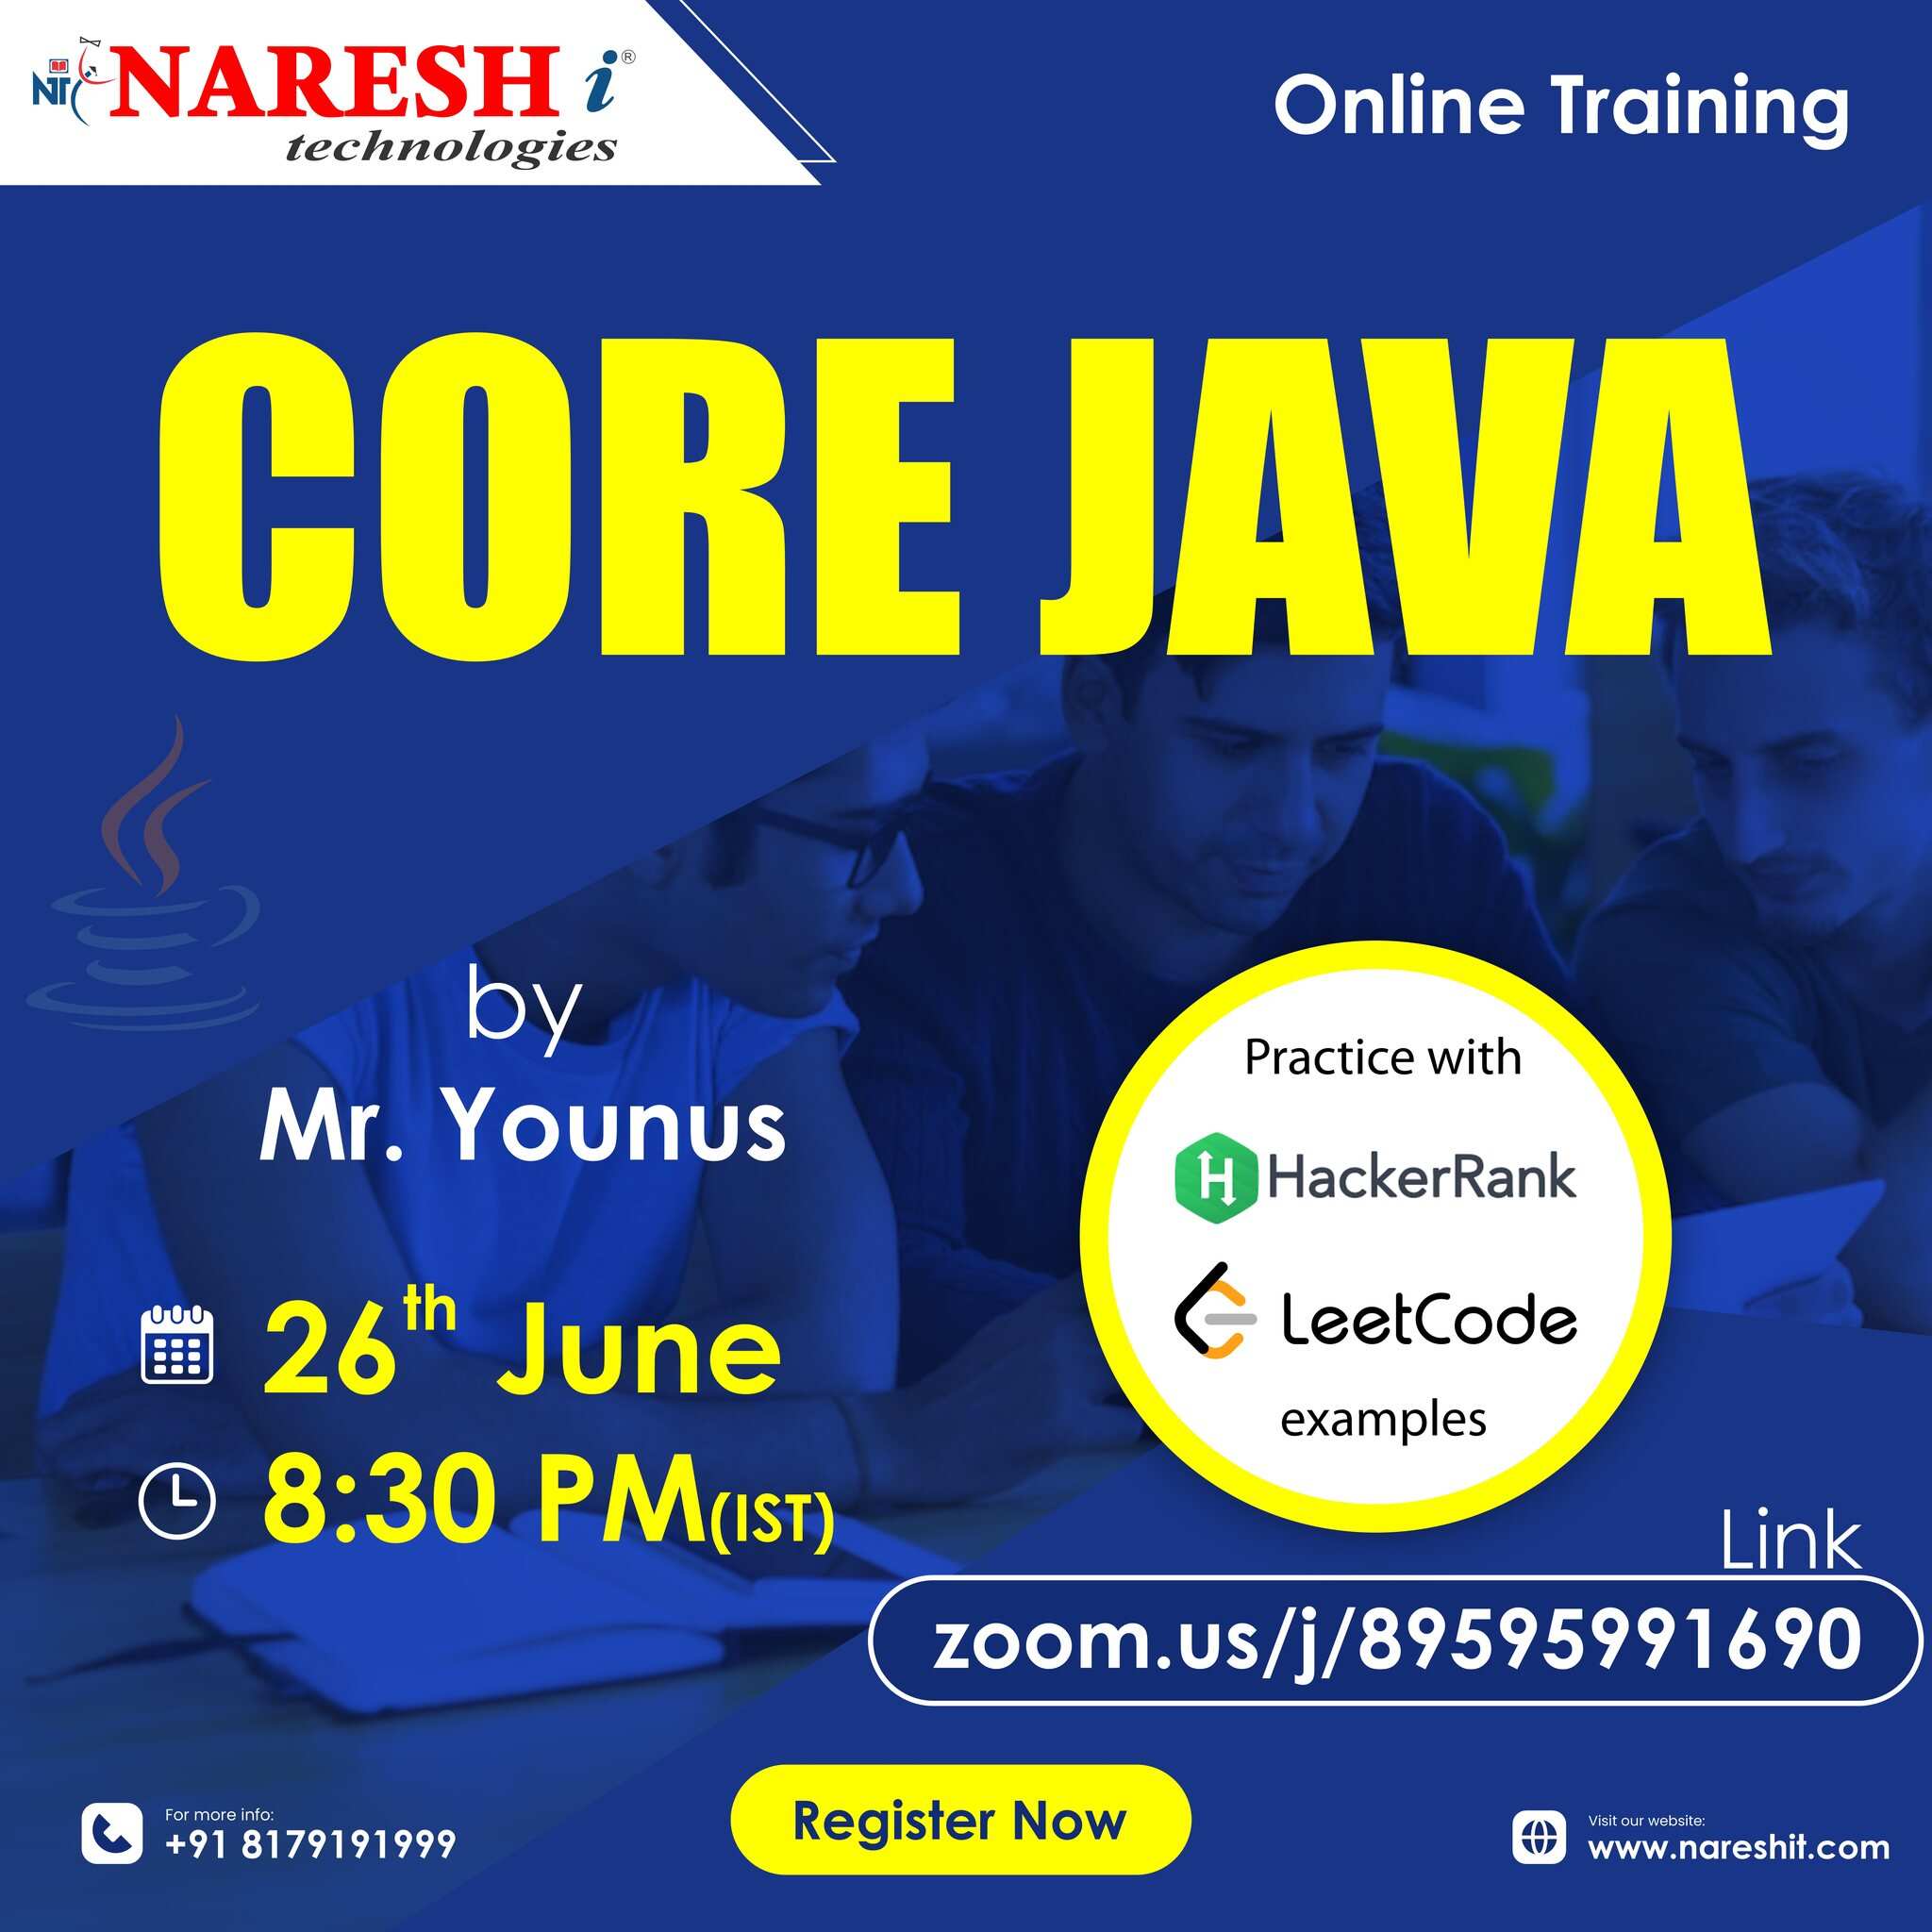 Free Demo On Core Java by Mr. Younus - NareshIT, Online Event